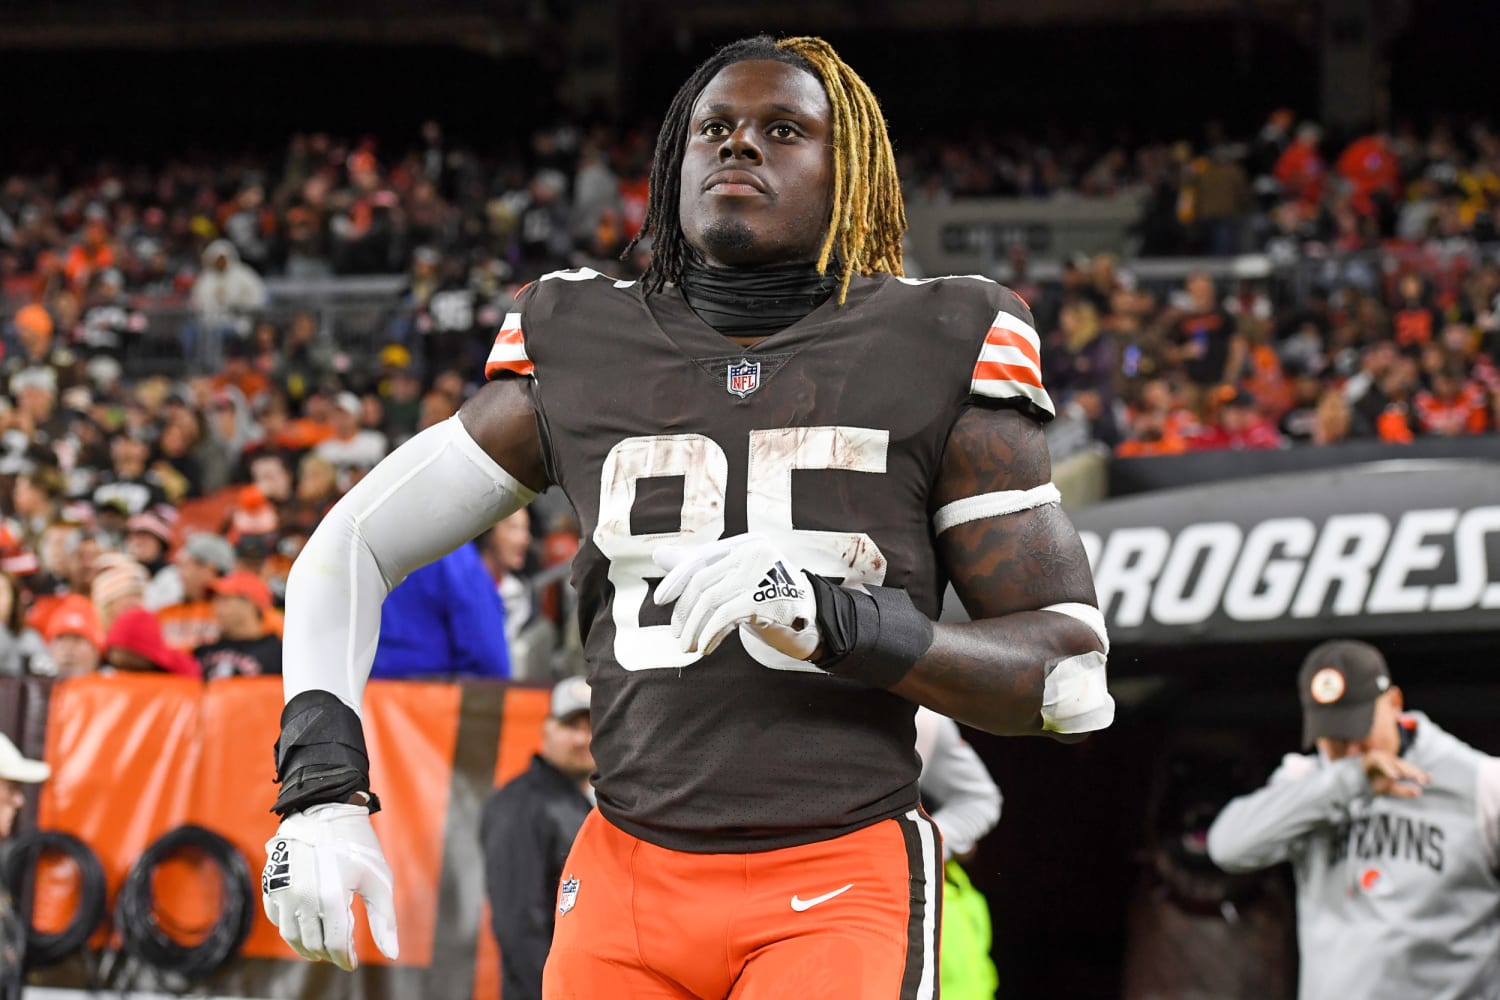 Cleveland Browns tight end David Njoku reveals severity of facial burns after fire pit accident